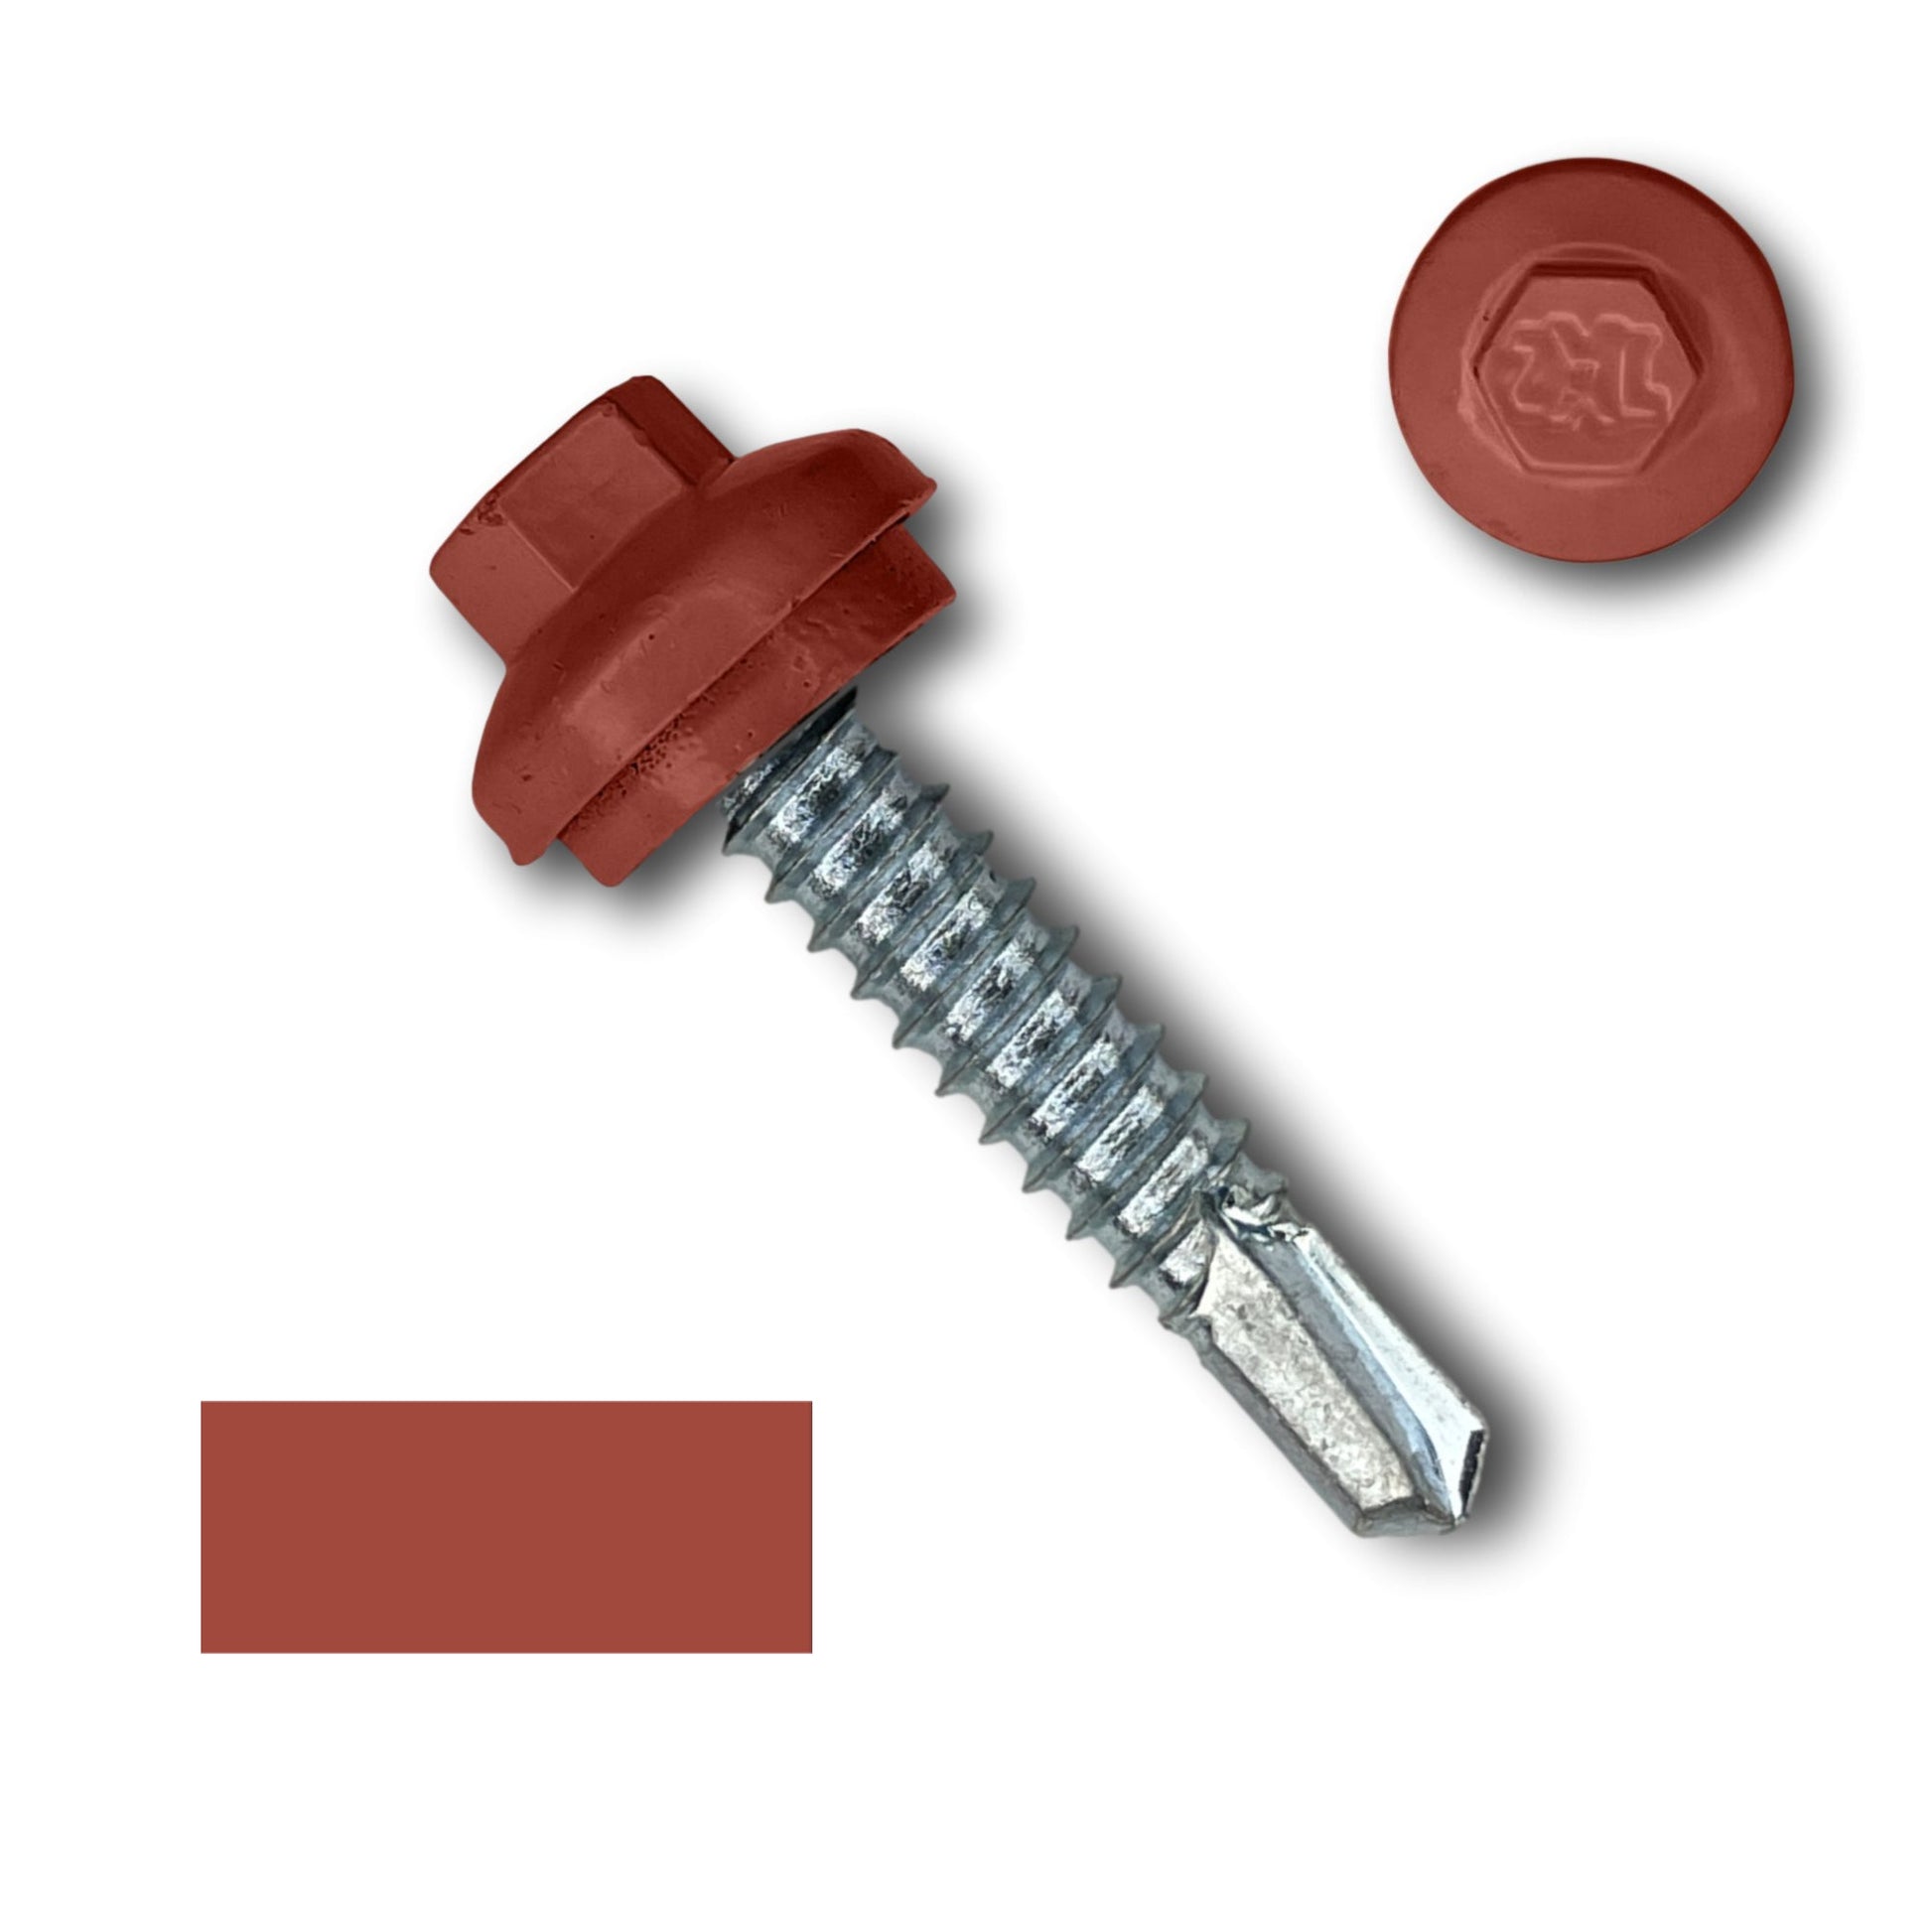 A red Perma Cover #14 x 1.25" ZXL Dome Cap Metal Building Screws (Metal-to-Metal), Self-Drilling - 250, 500, or 1000 Pack is shown with a zoomed-in view of its head and a matching color swatch to its left. Reminiscent of ZXL Dome Cap, the screw has a metallic threaded body and is topped with a red hexagonal head.